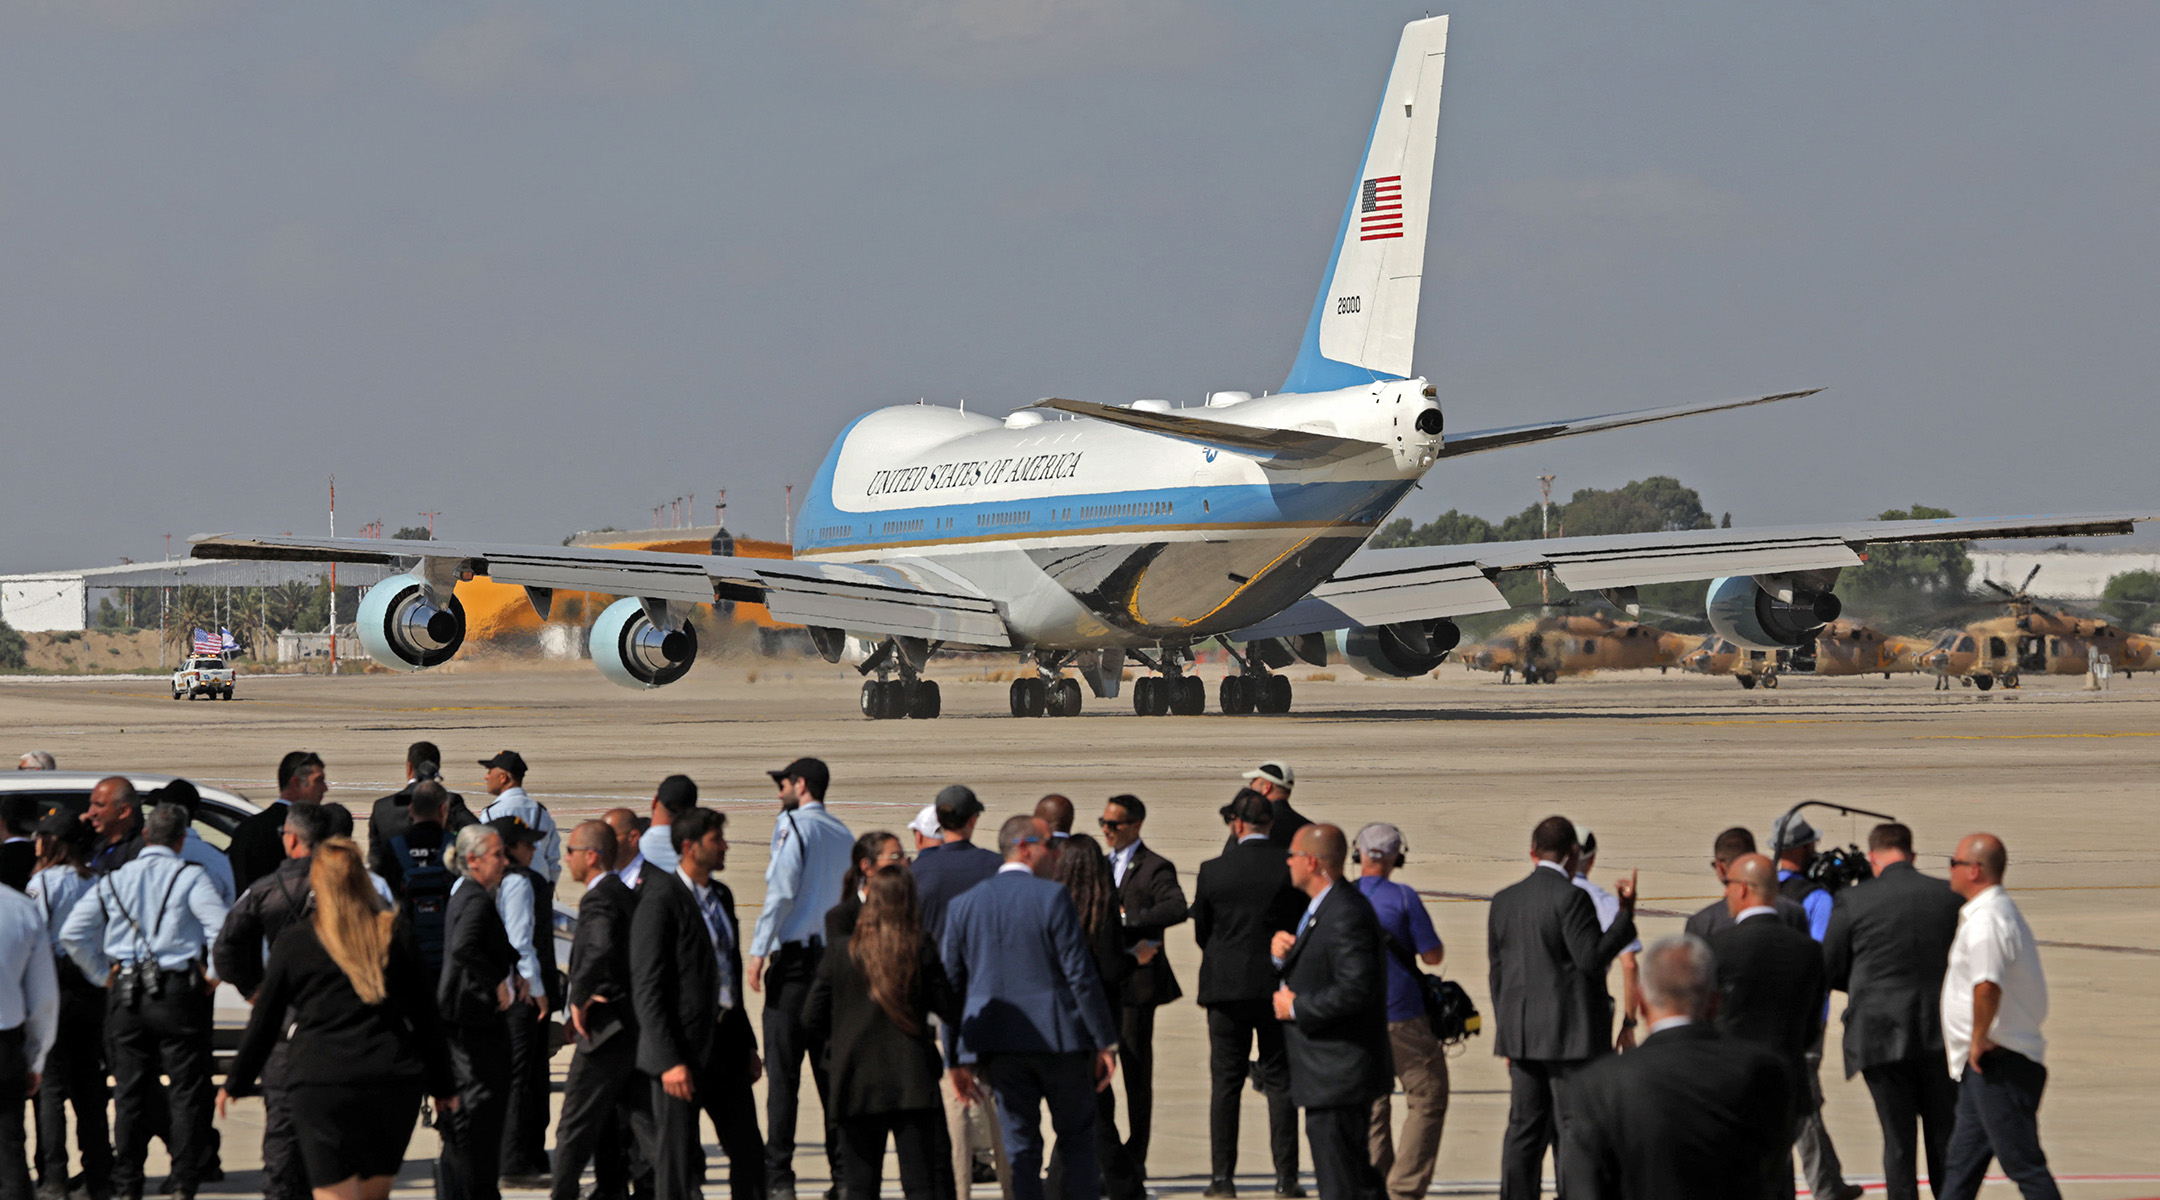 The U.S. president’s aircraft Air Force One prepares for takeoff from Israel’s Ben Gurion Airport, July 15, 2022. (Abir Sultan/Pool/AFP via Getty Images)